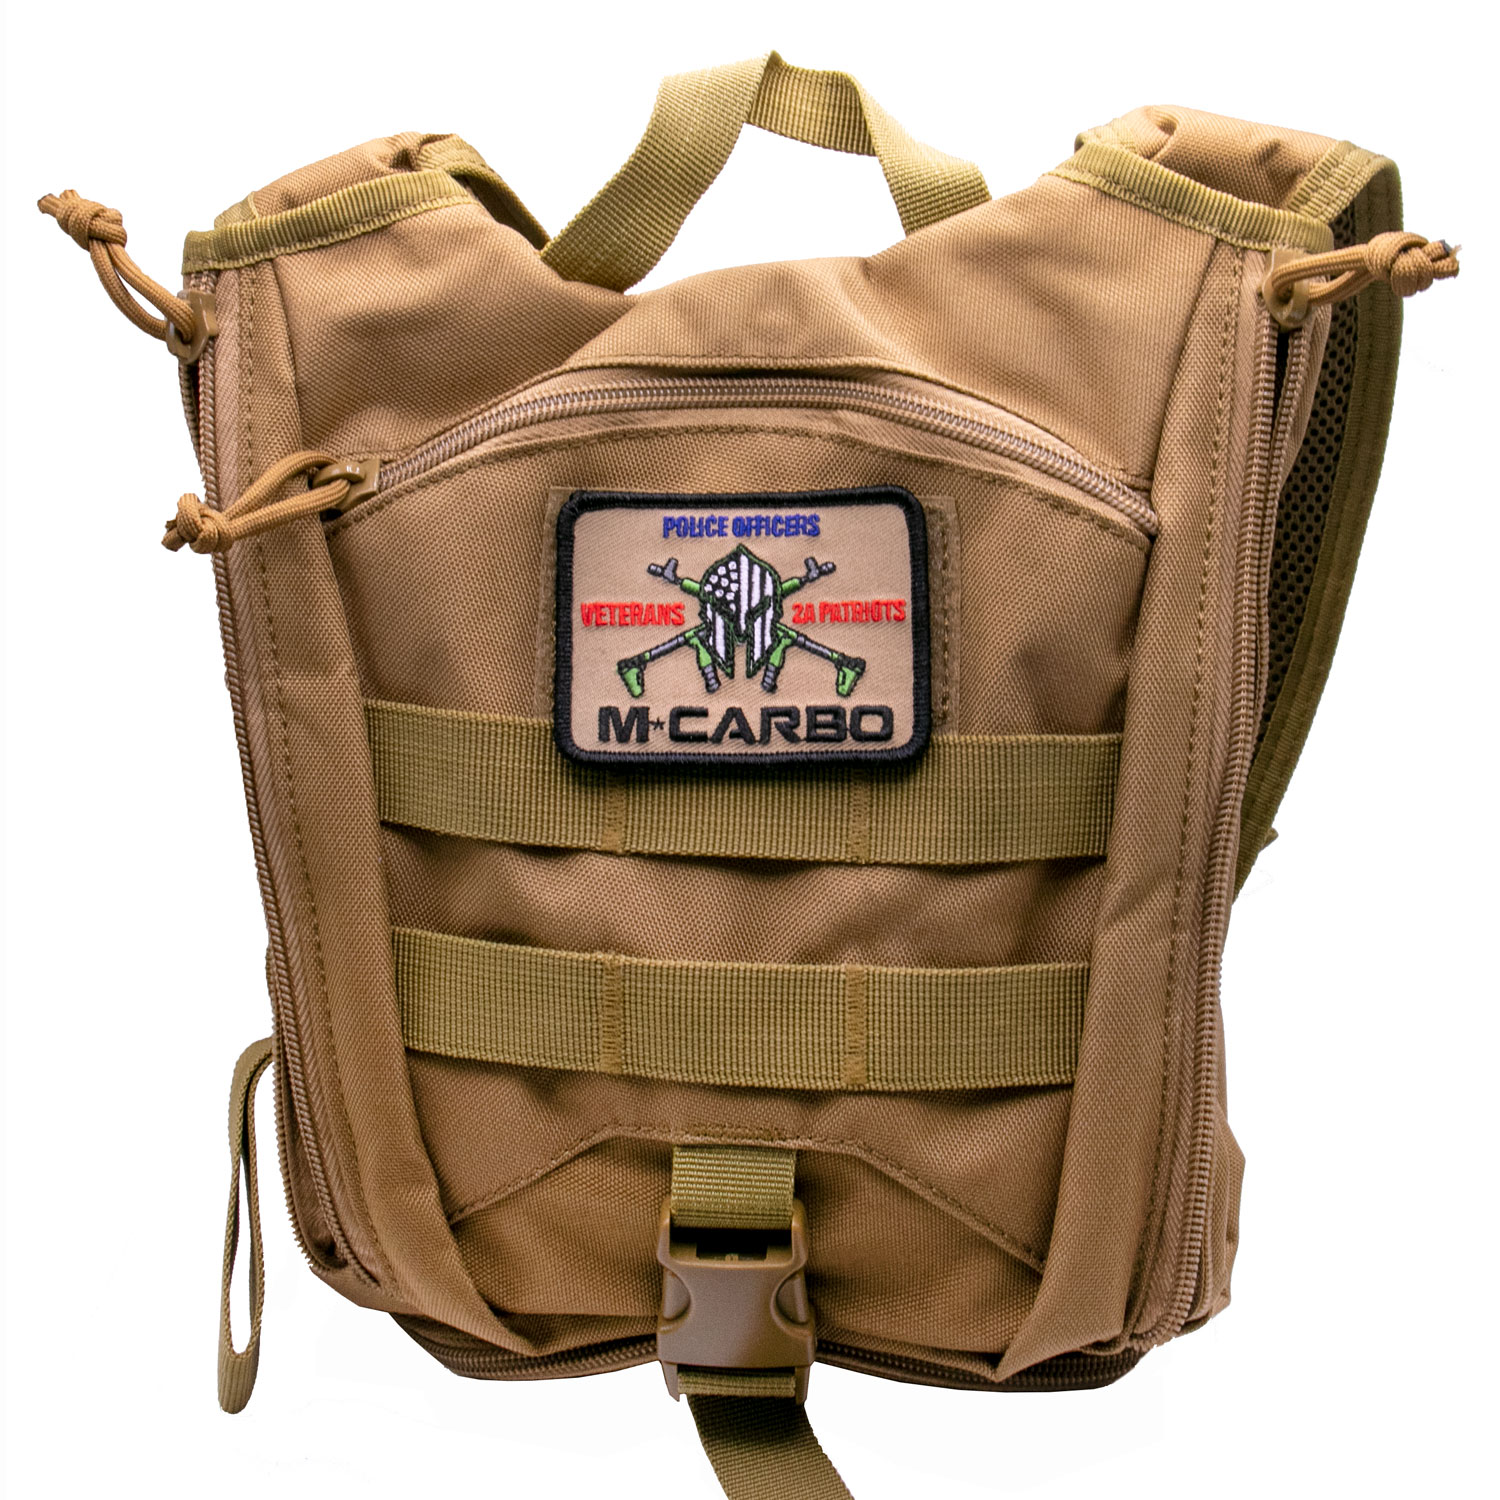 MCARBO Velcro Patch on Camo Backpack